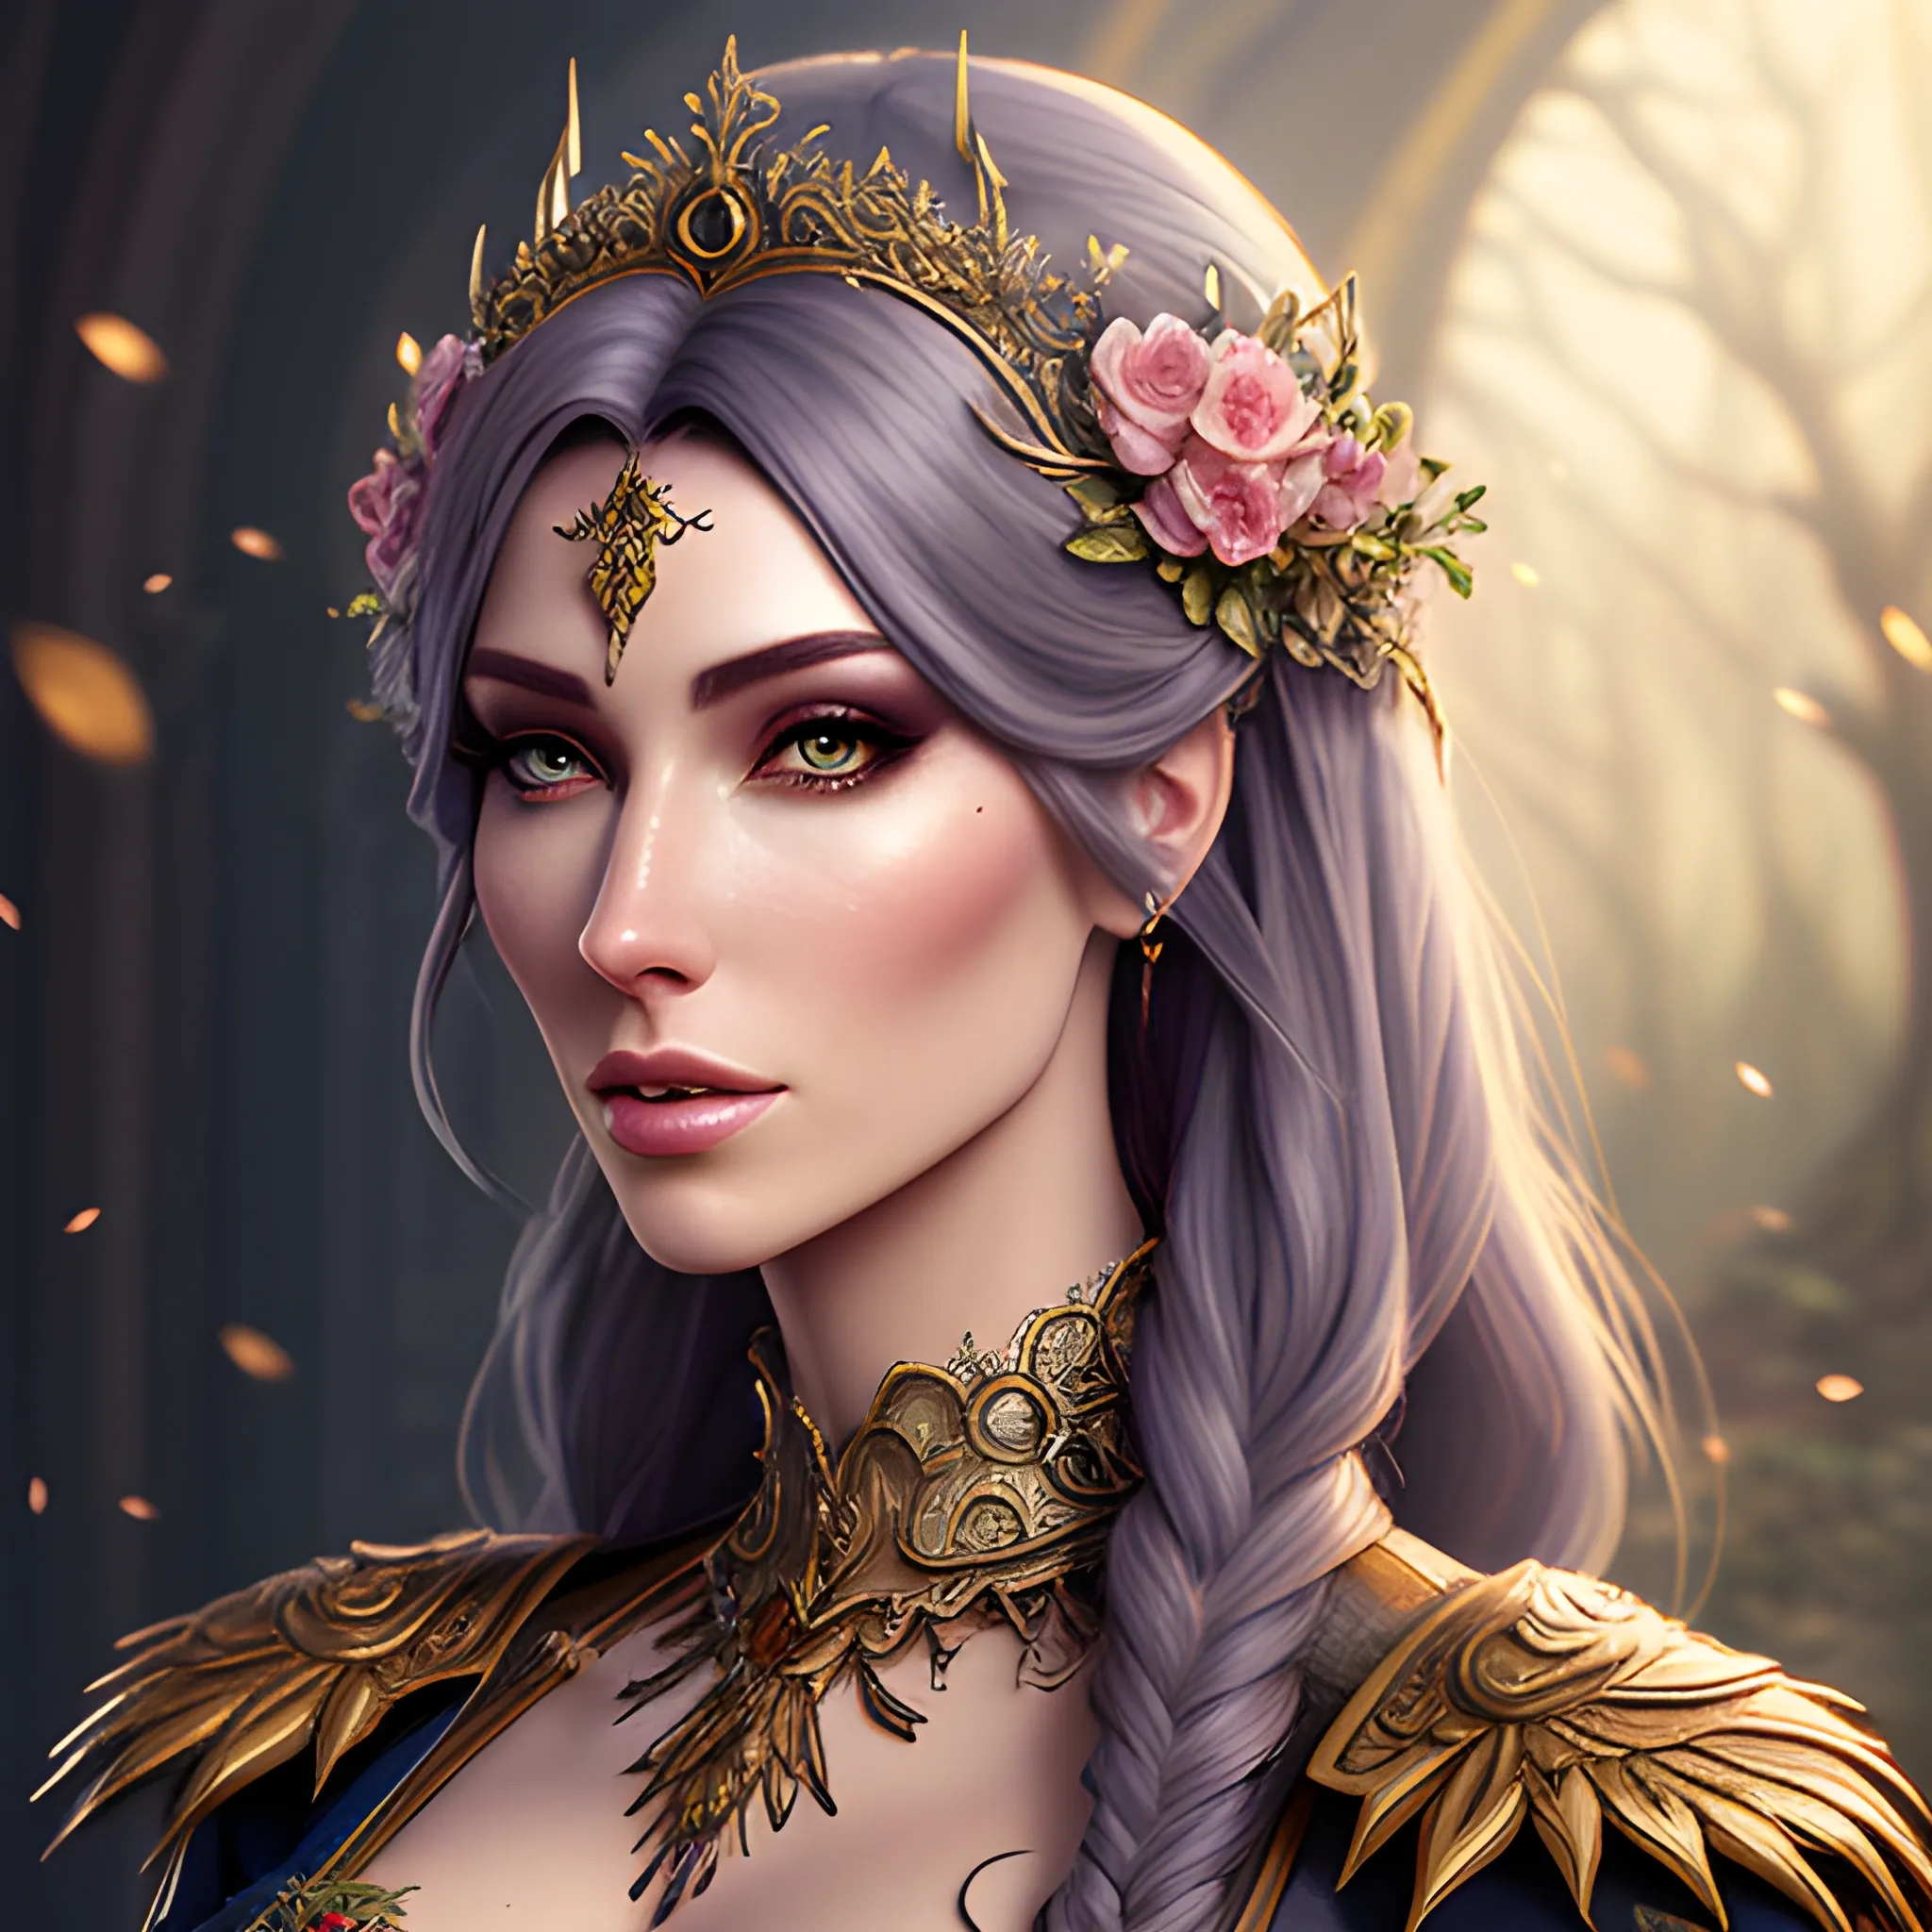 Beautiful girl, concept art, 8k intricate details, fairytale style,